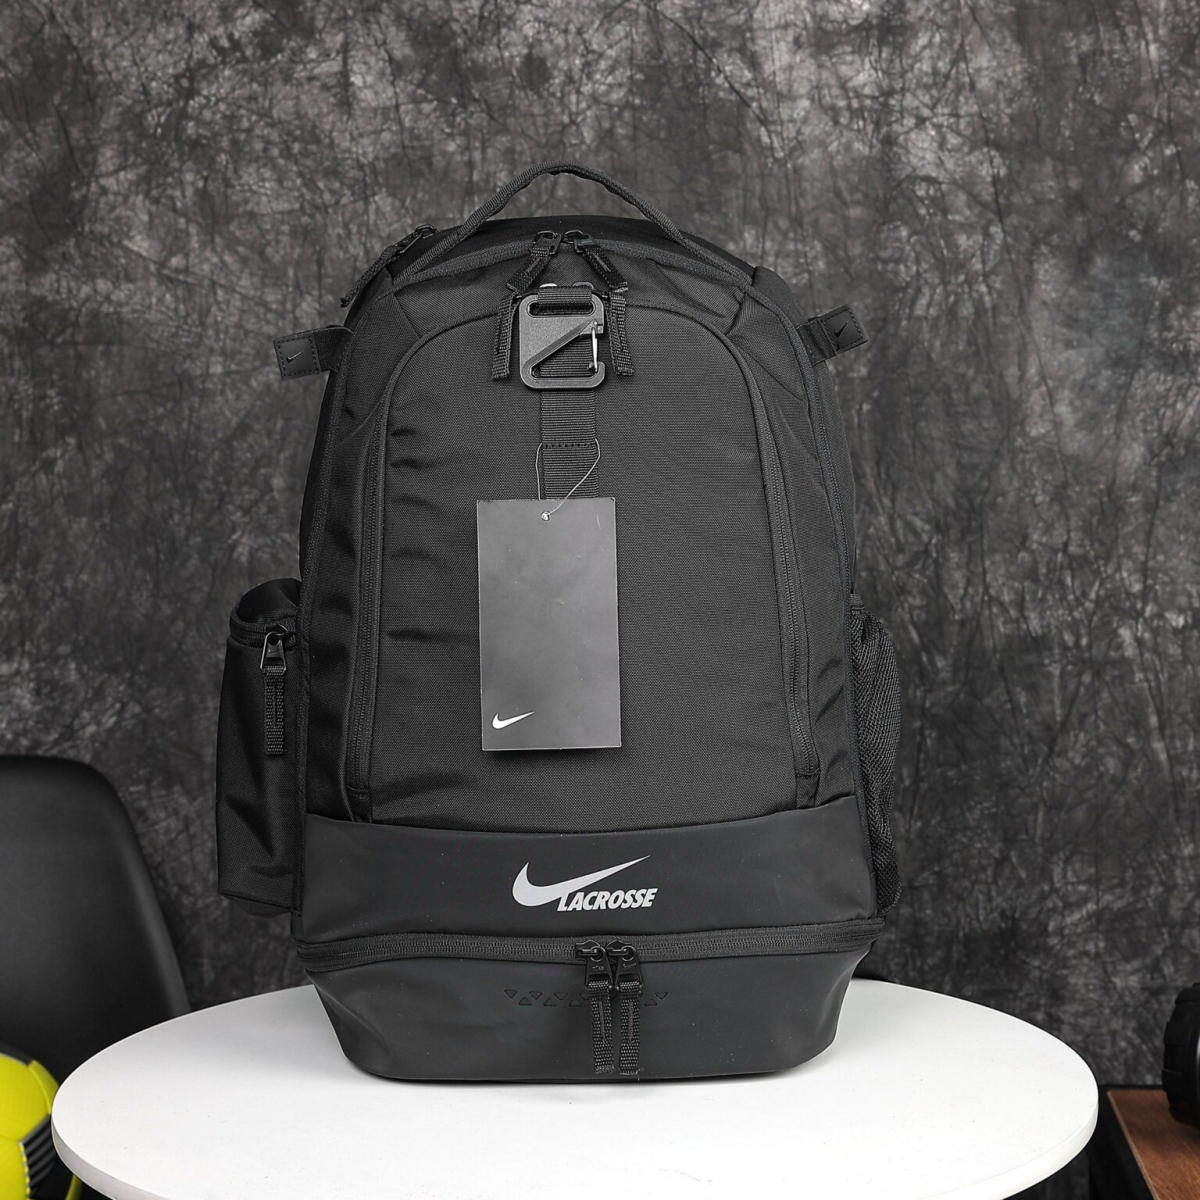 Balo Thể Thao Nike Zone Lacrosse Backpack Có Ngăn Giày Riếng